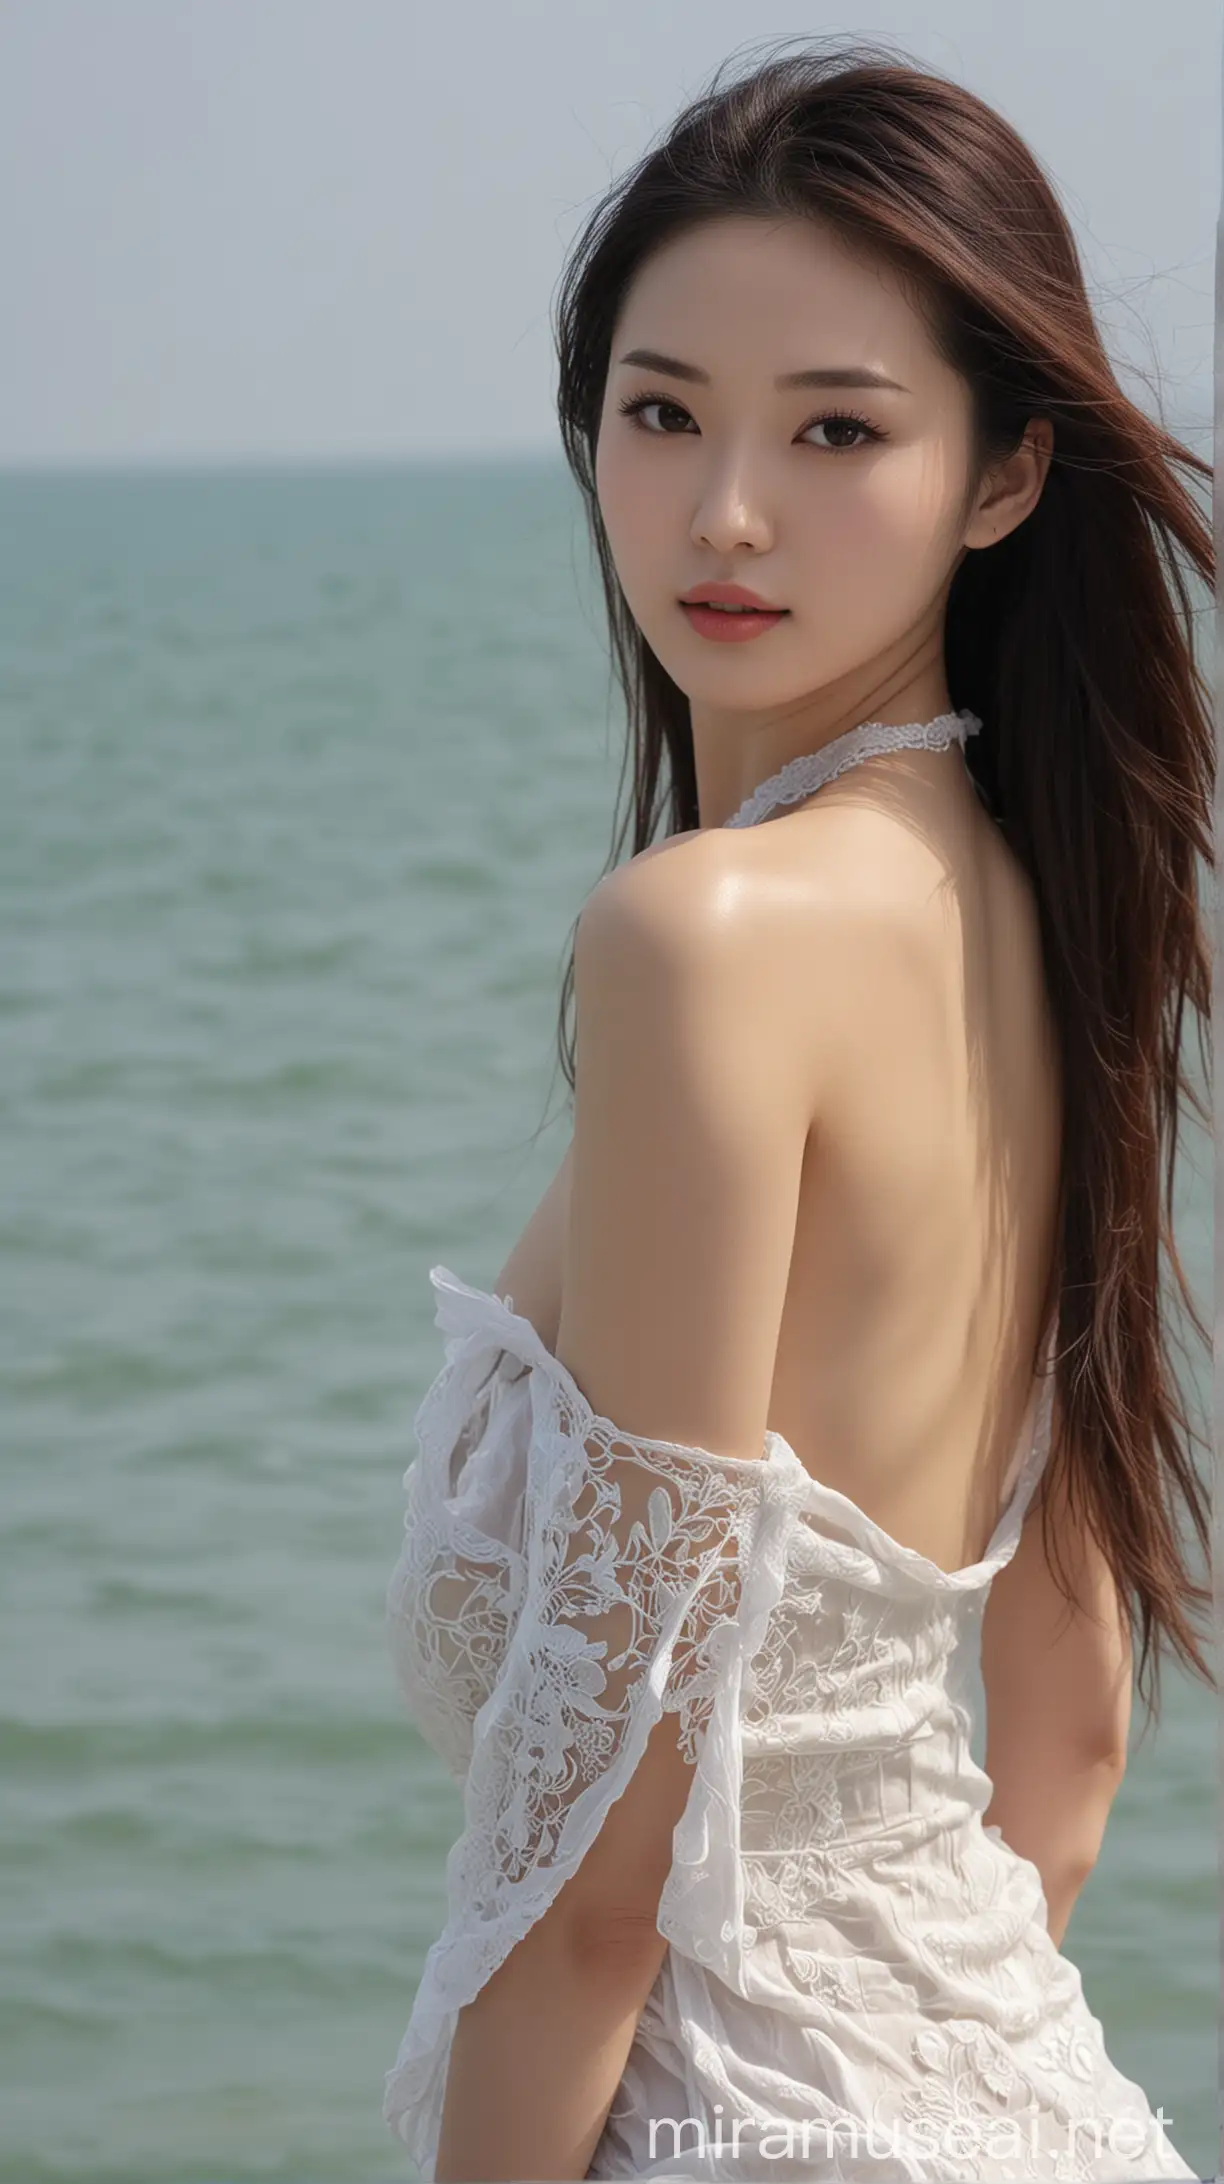 Elegant Chinese Beauty Posing by the Sea